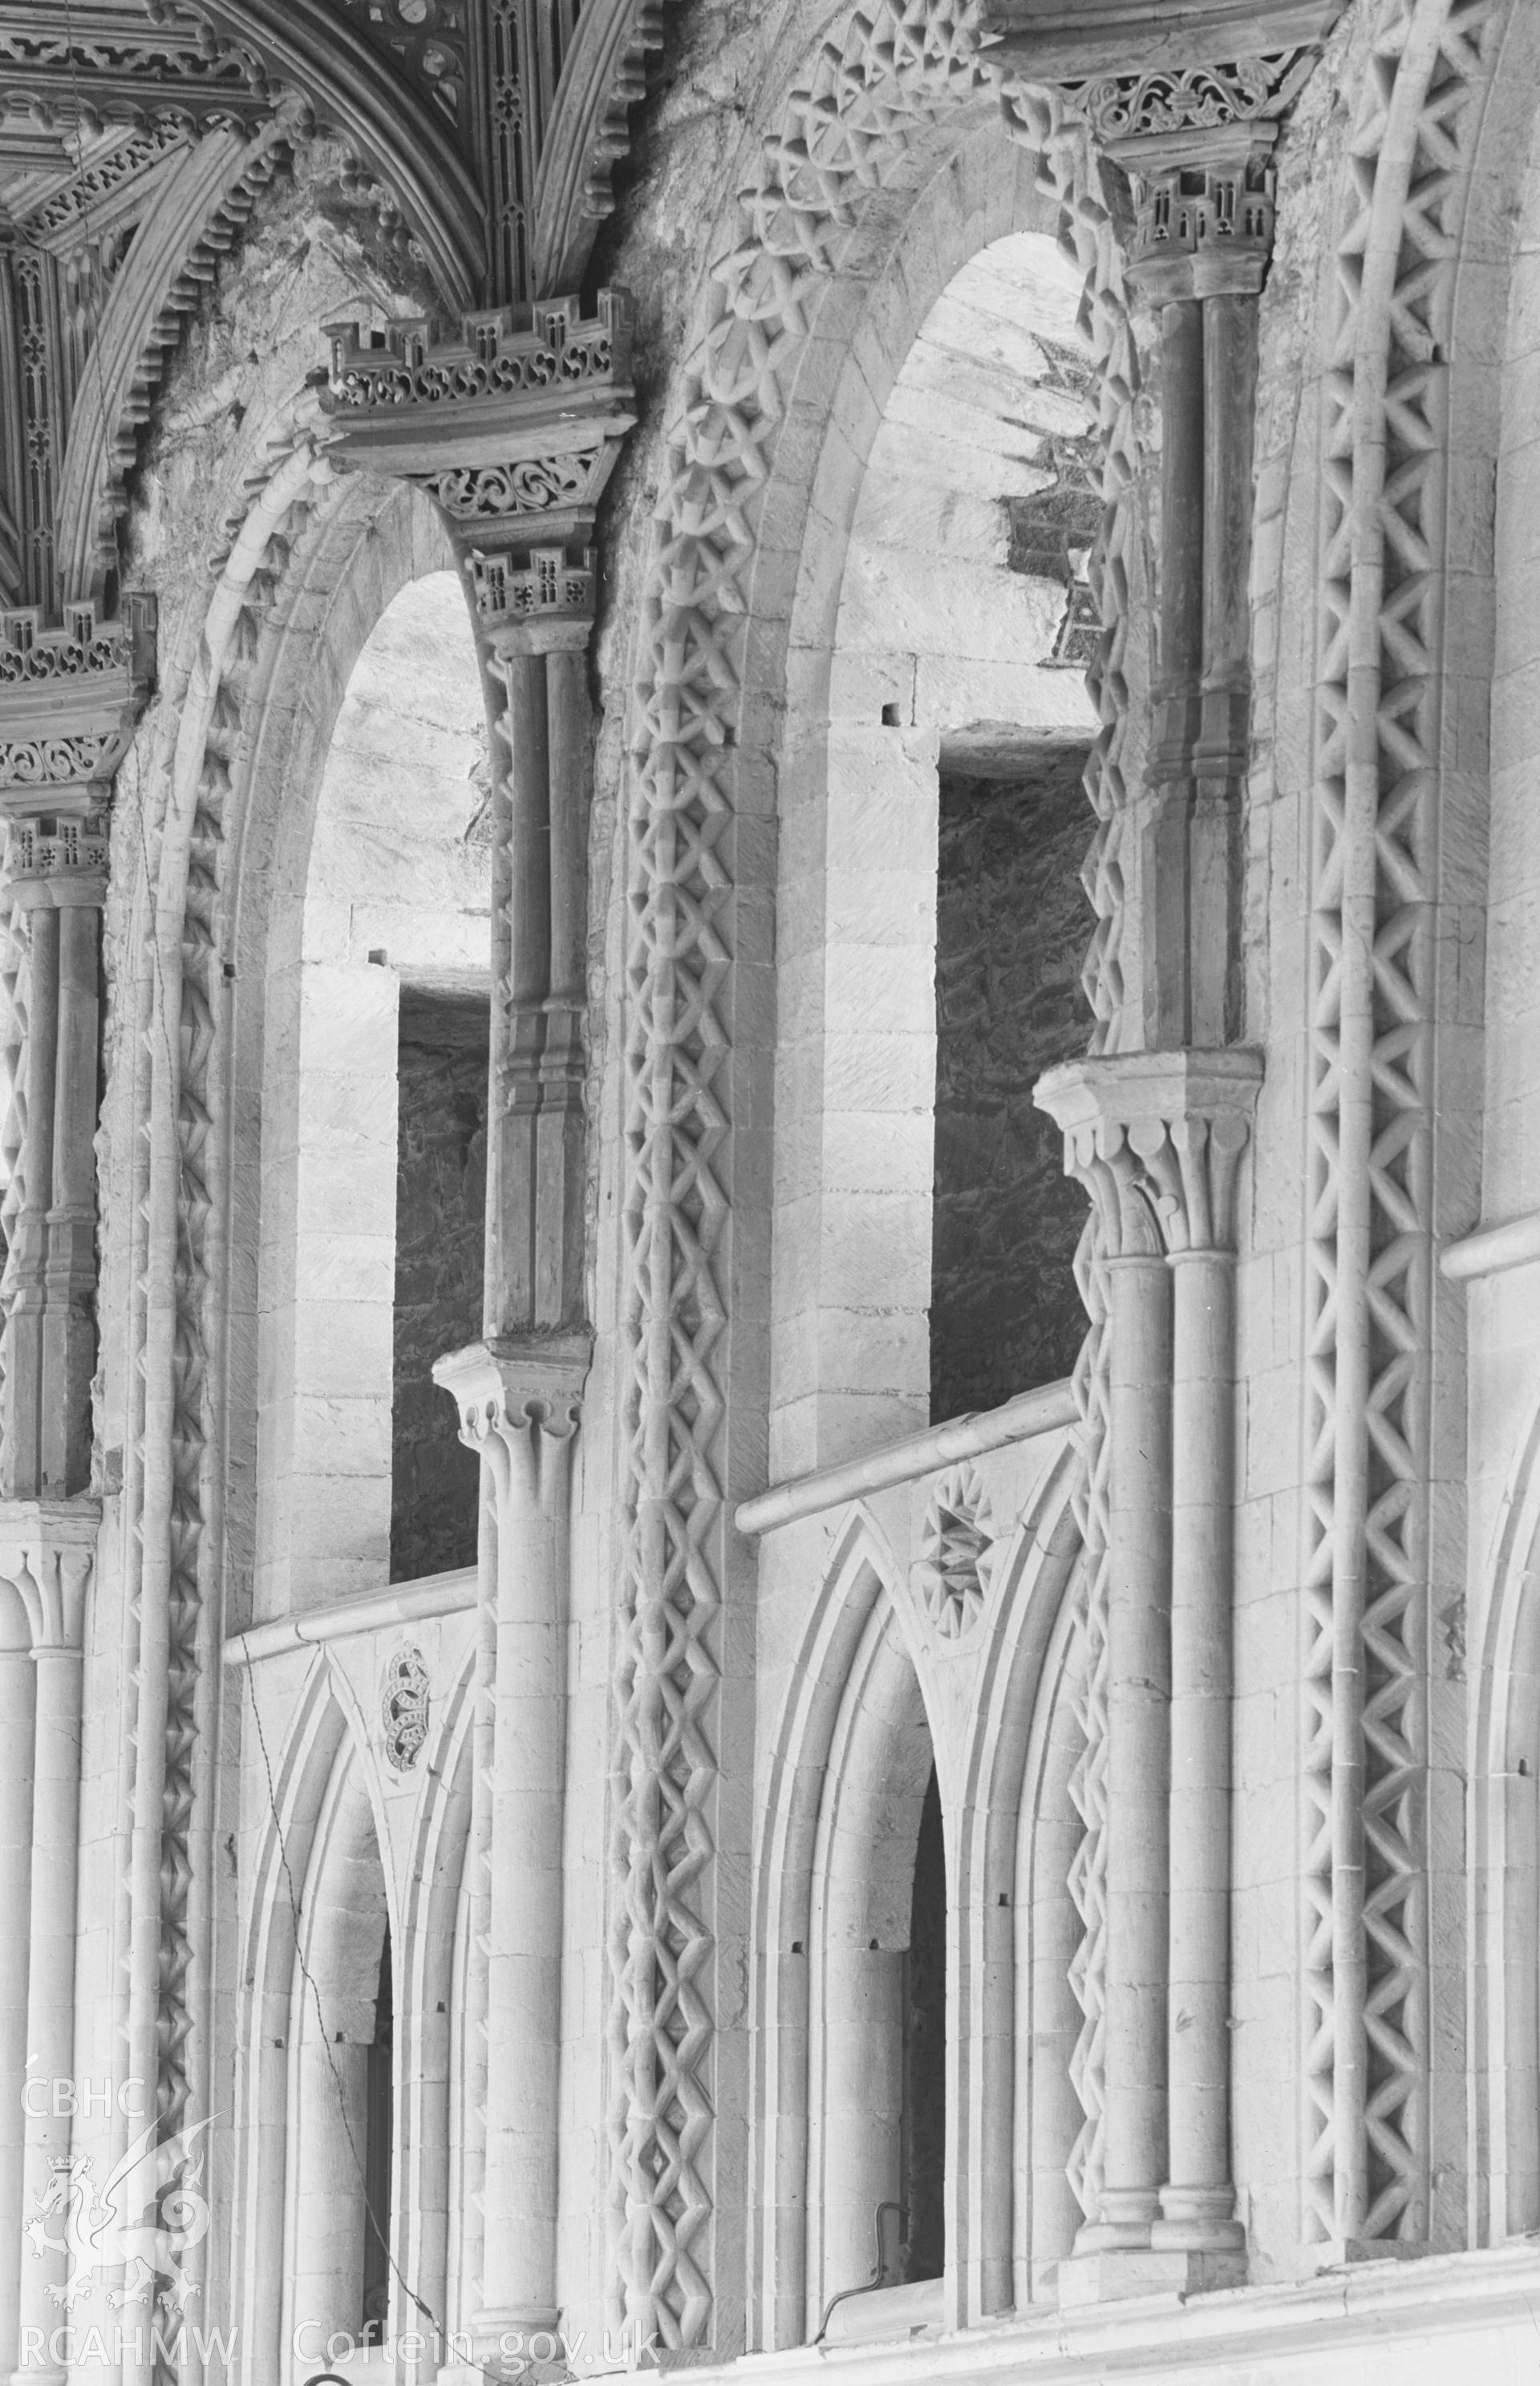 Digital copy of a black and white nitrate negative showing interior stonework decoration at St. David's Cathedral, taken by E.W. Lovegrove, July 1936